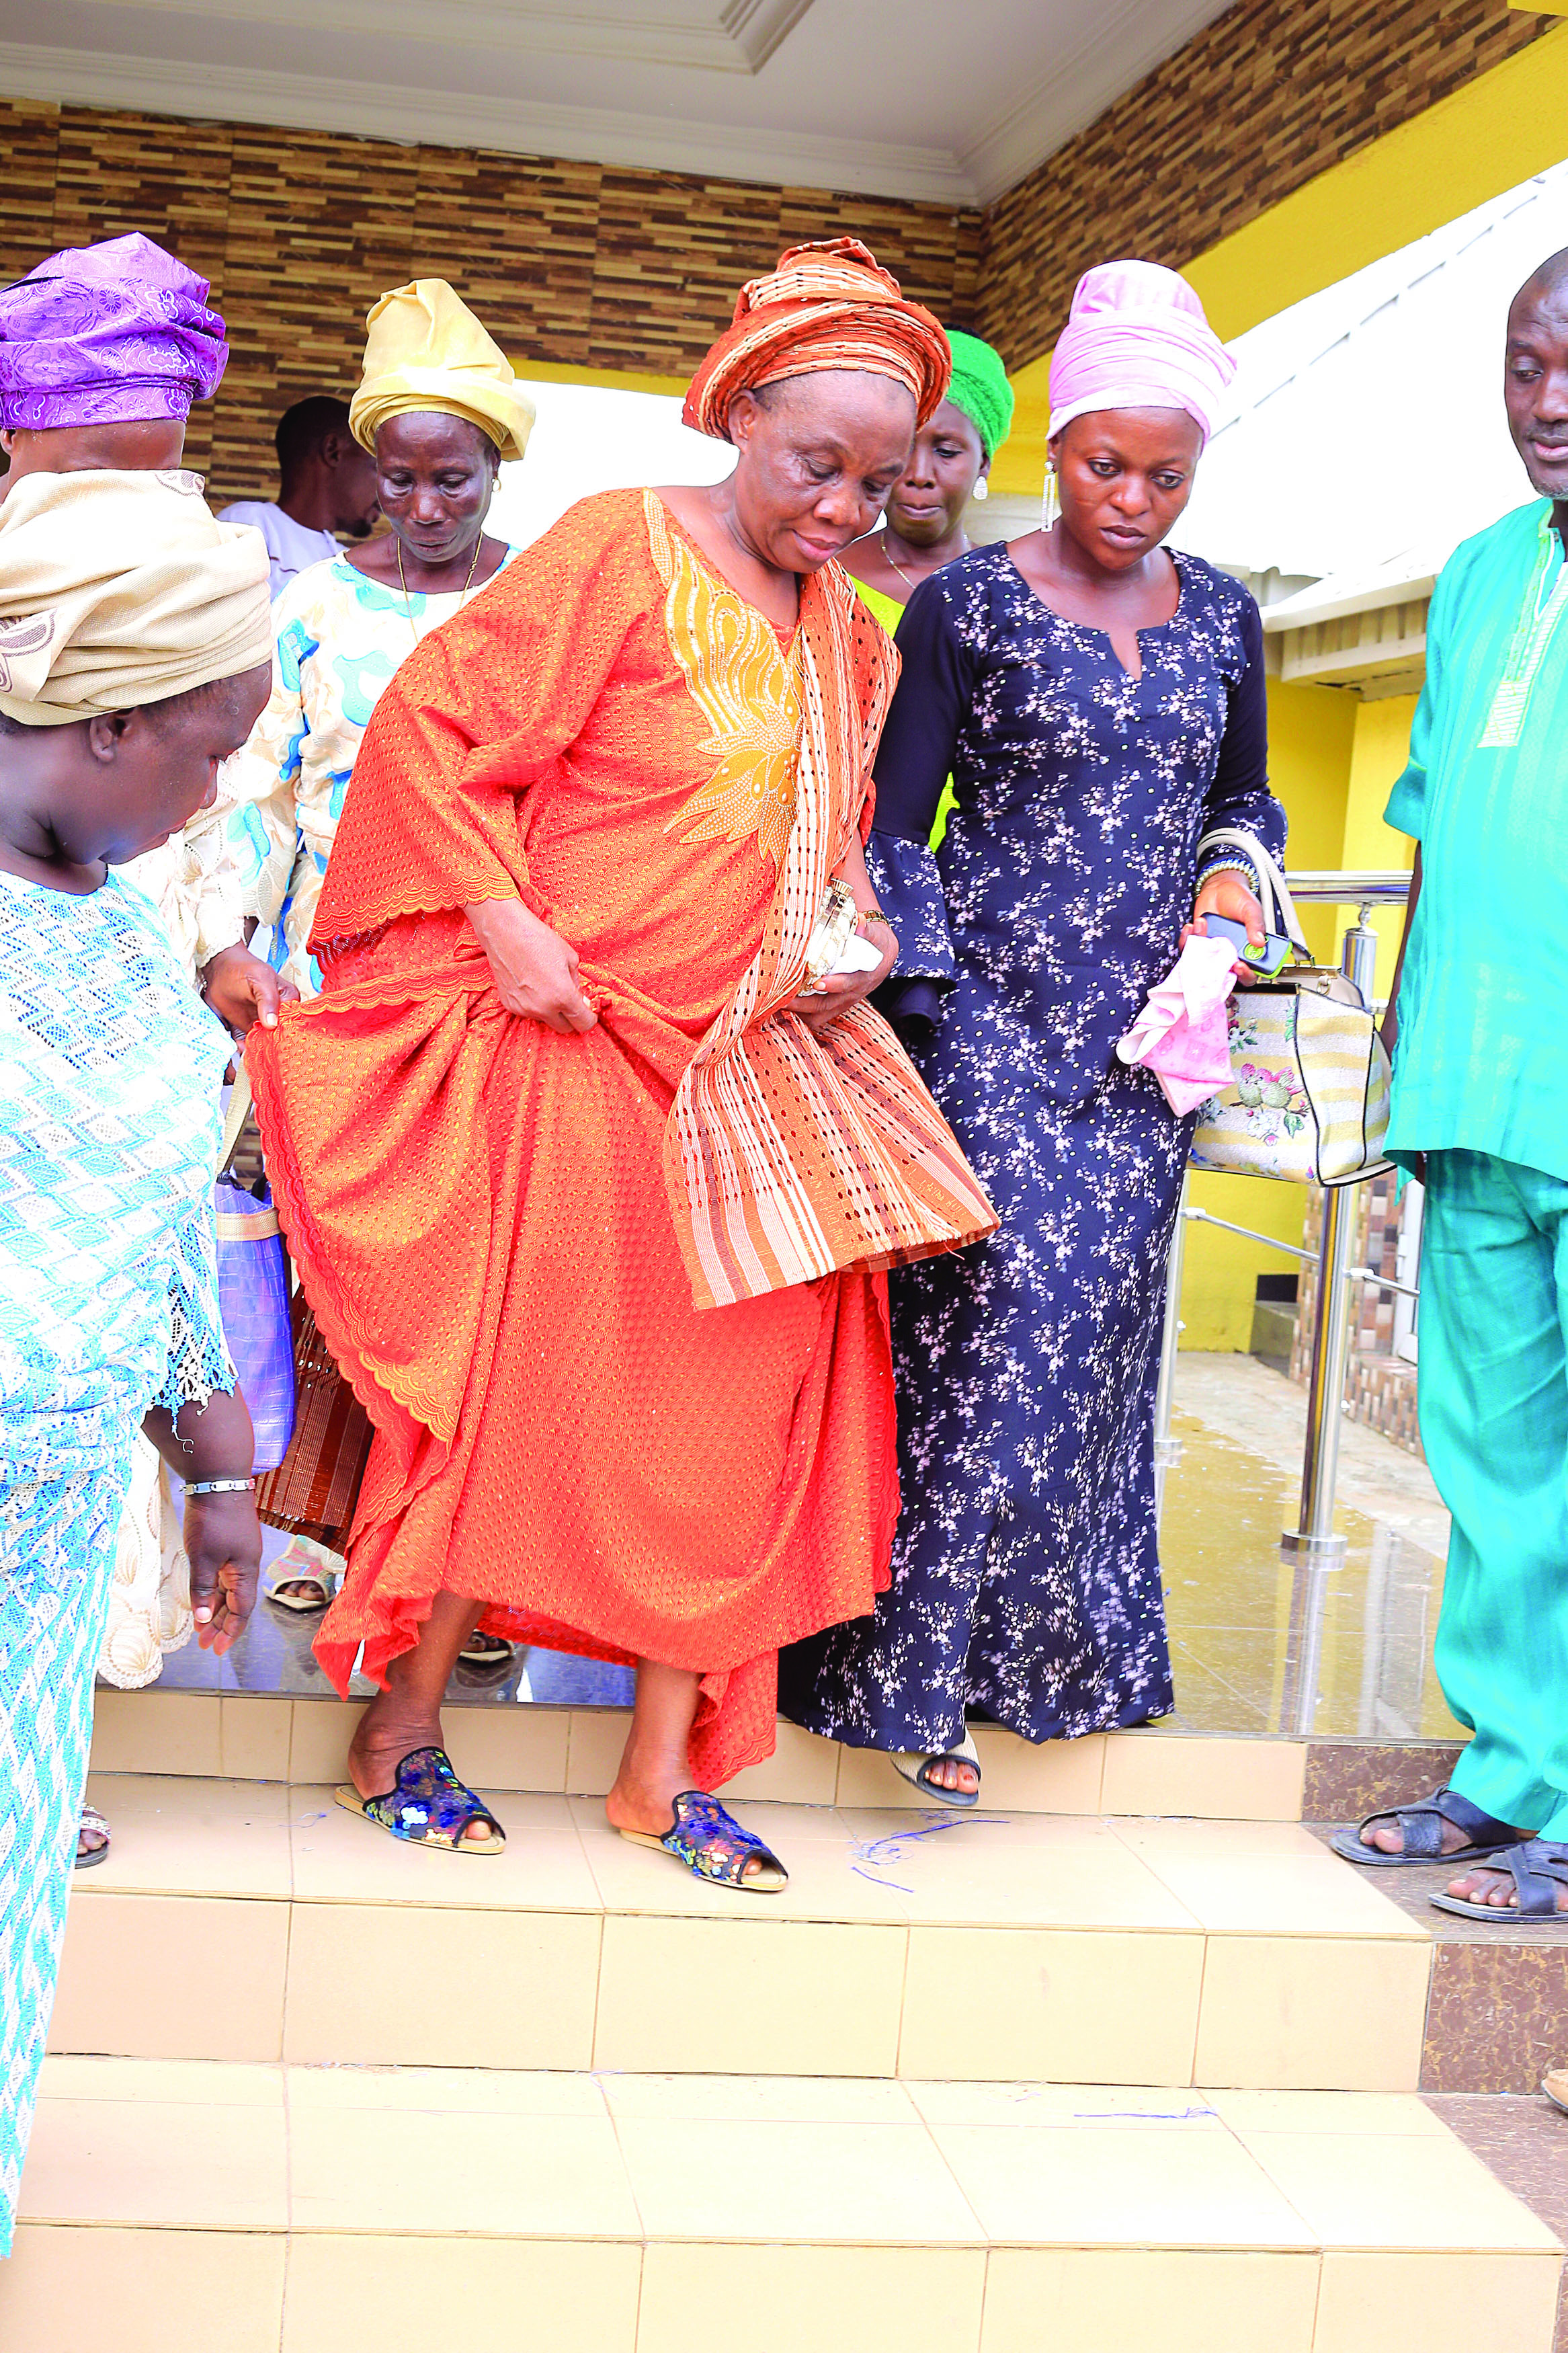 DEACONESS RISIKAT OGUNDIPE CELEBRATES A LIVELY 70TH BIRTHDAY IN LAGOS